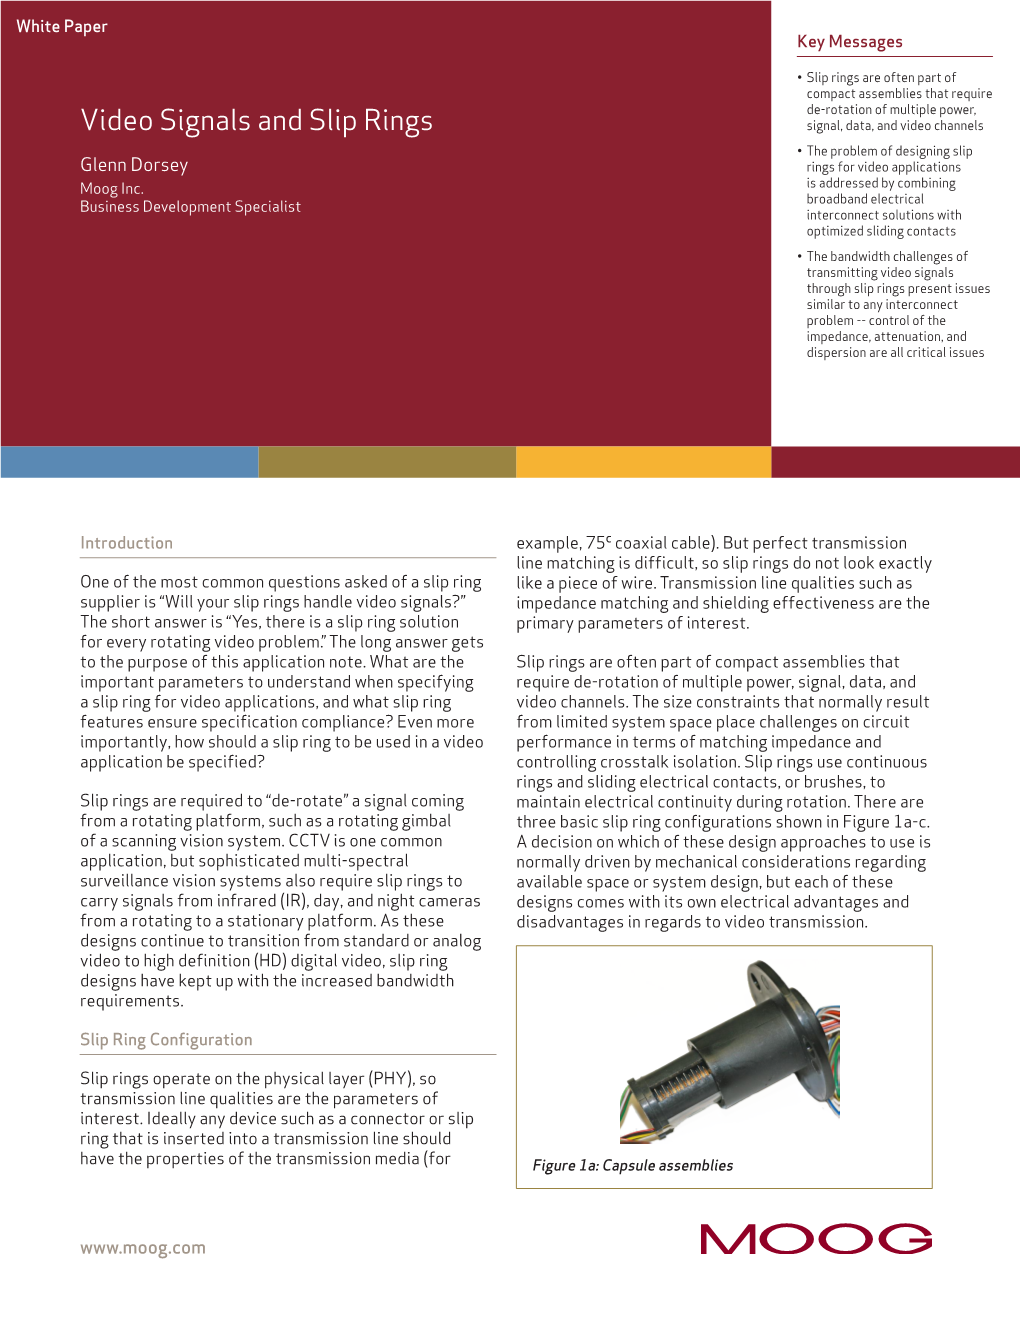 Video Signals and Slip Rings White Paper MS3351 03/20